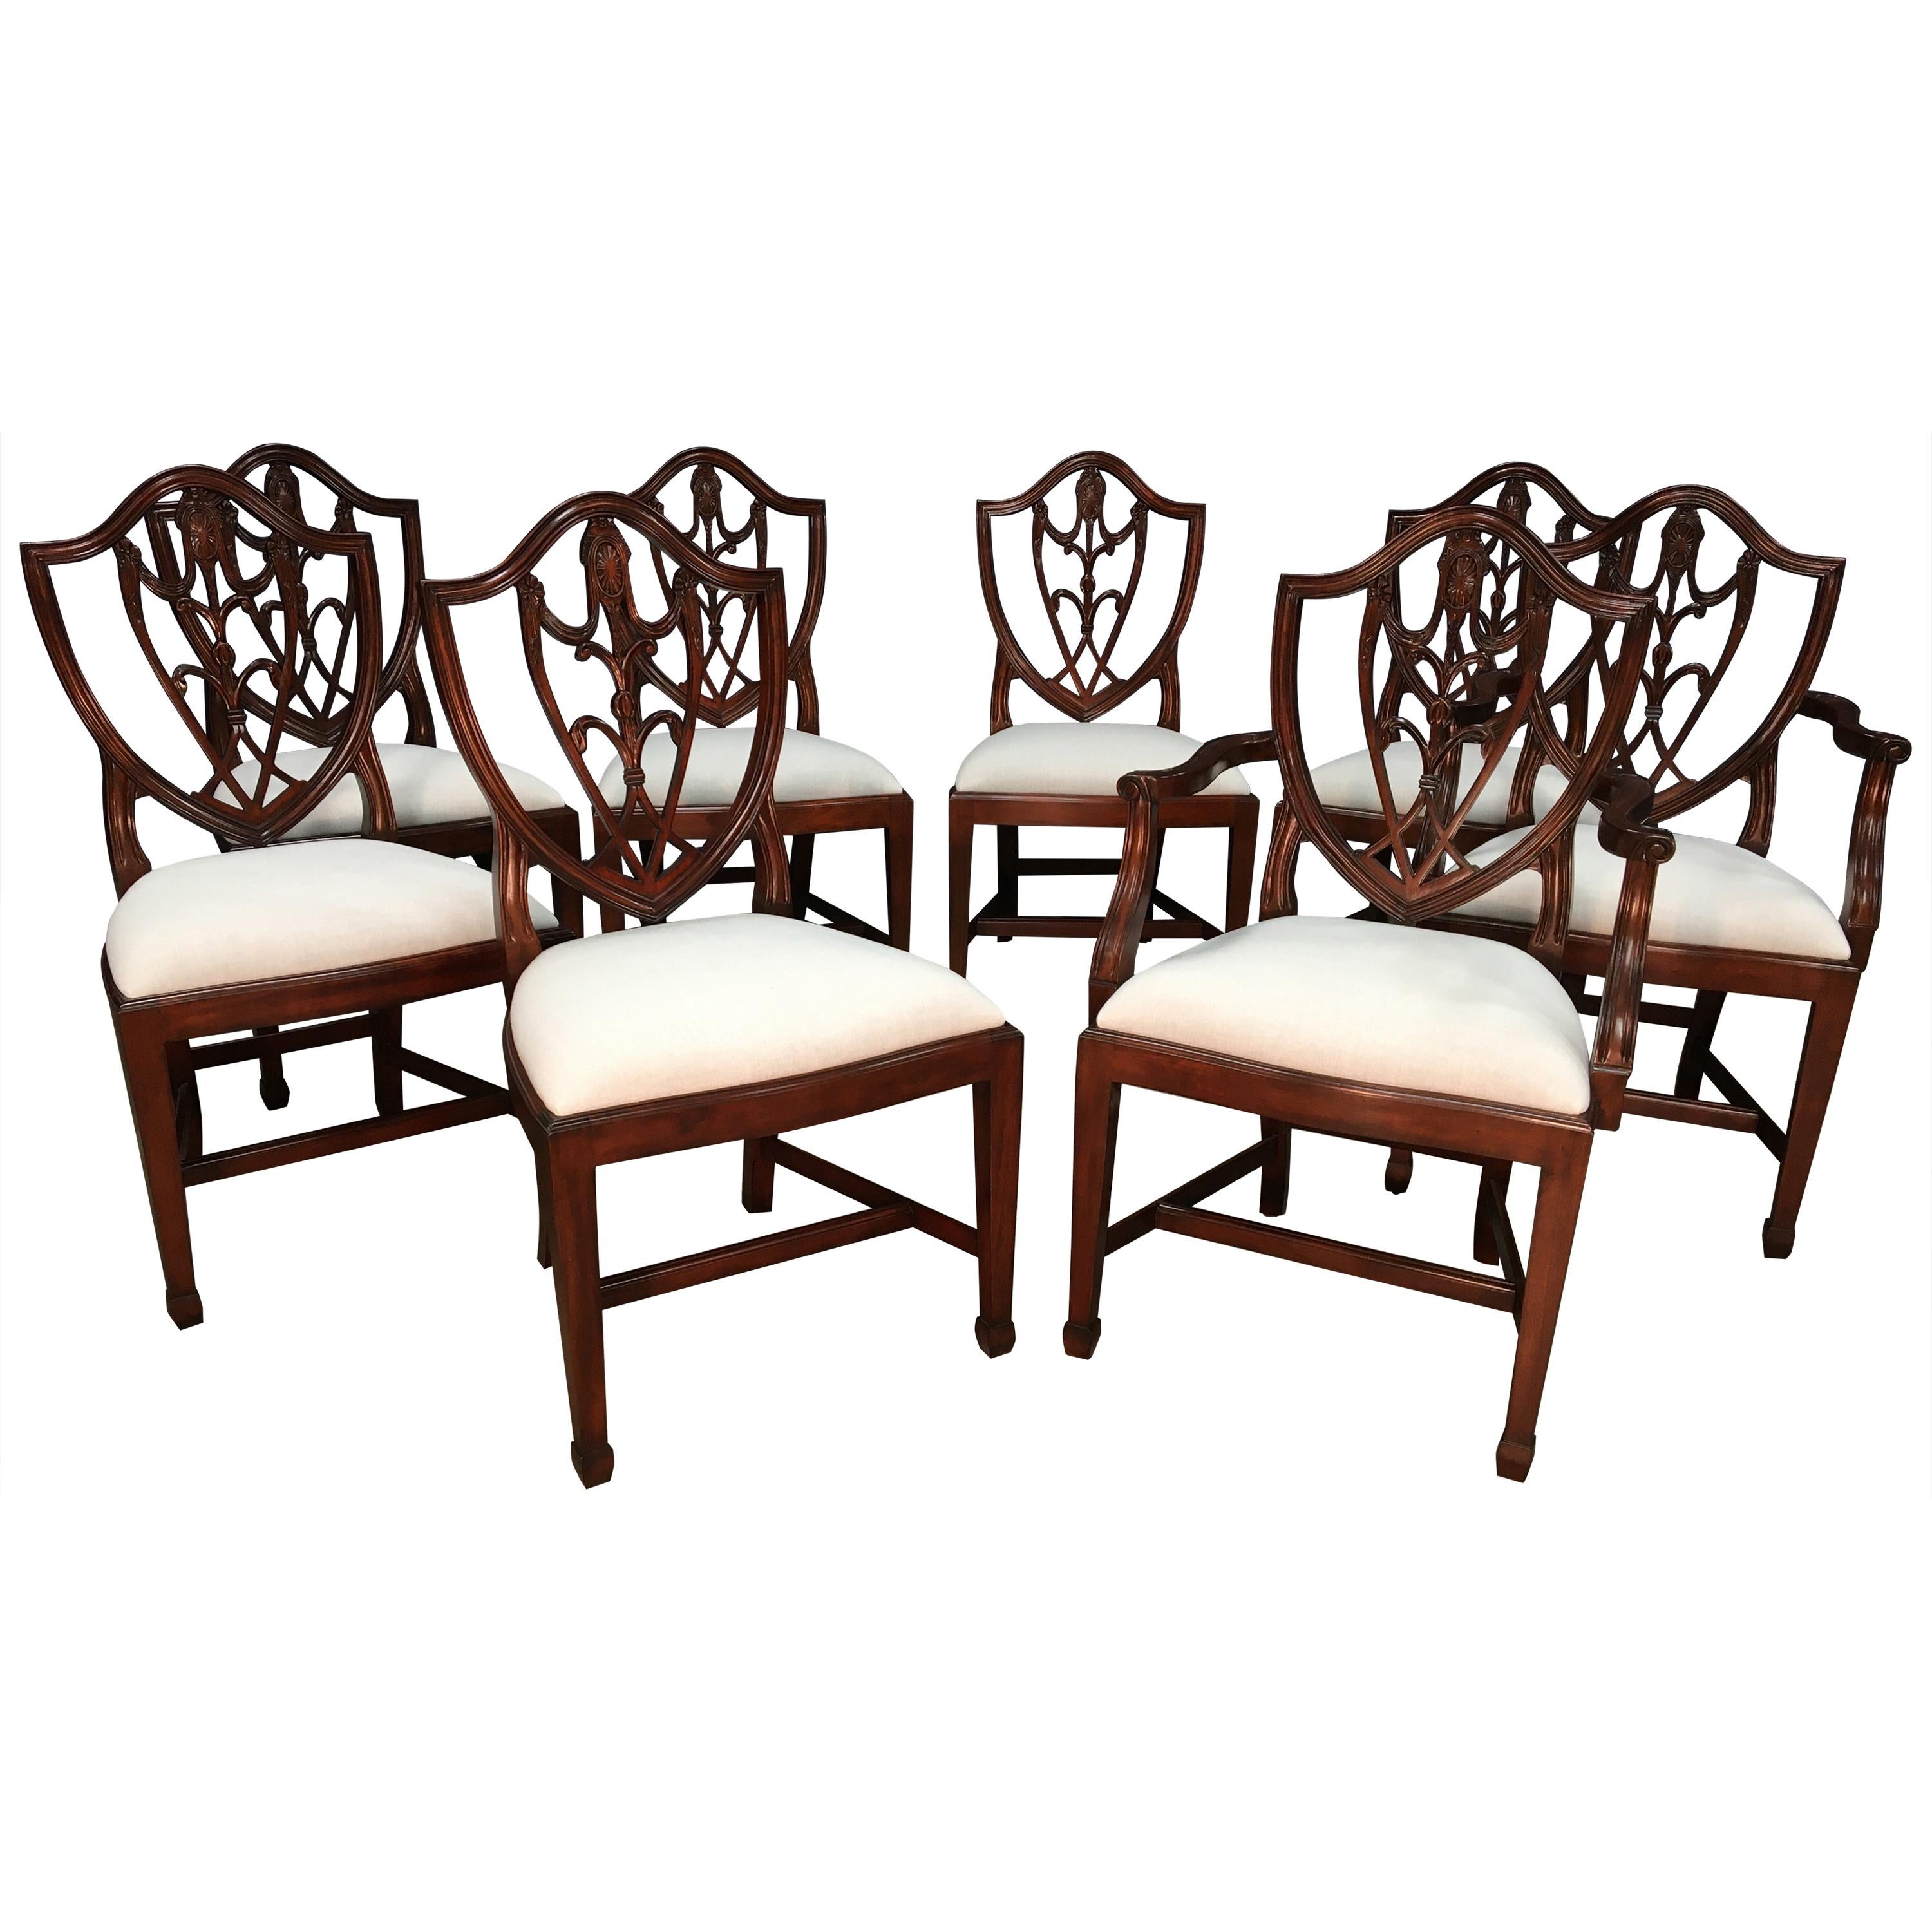 Eight Mahogany Shieldback Dining Chairs by Leighton Hall